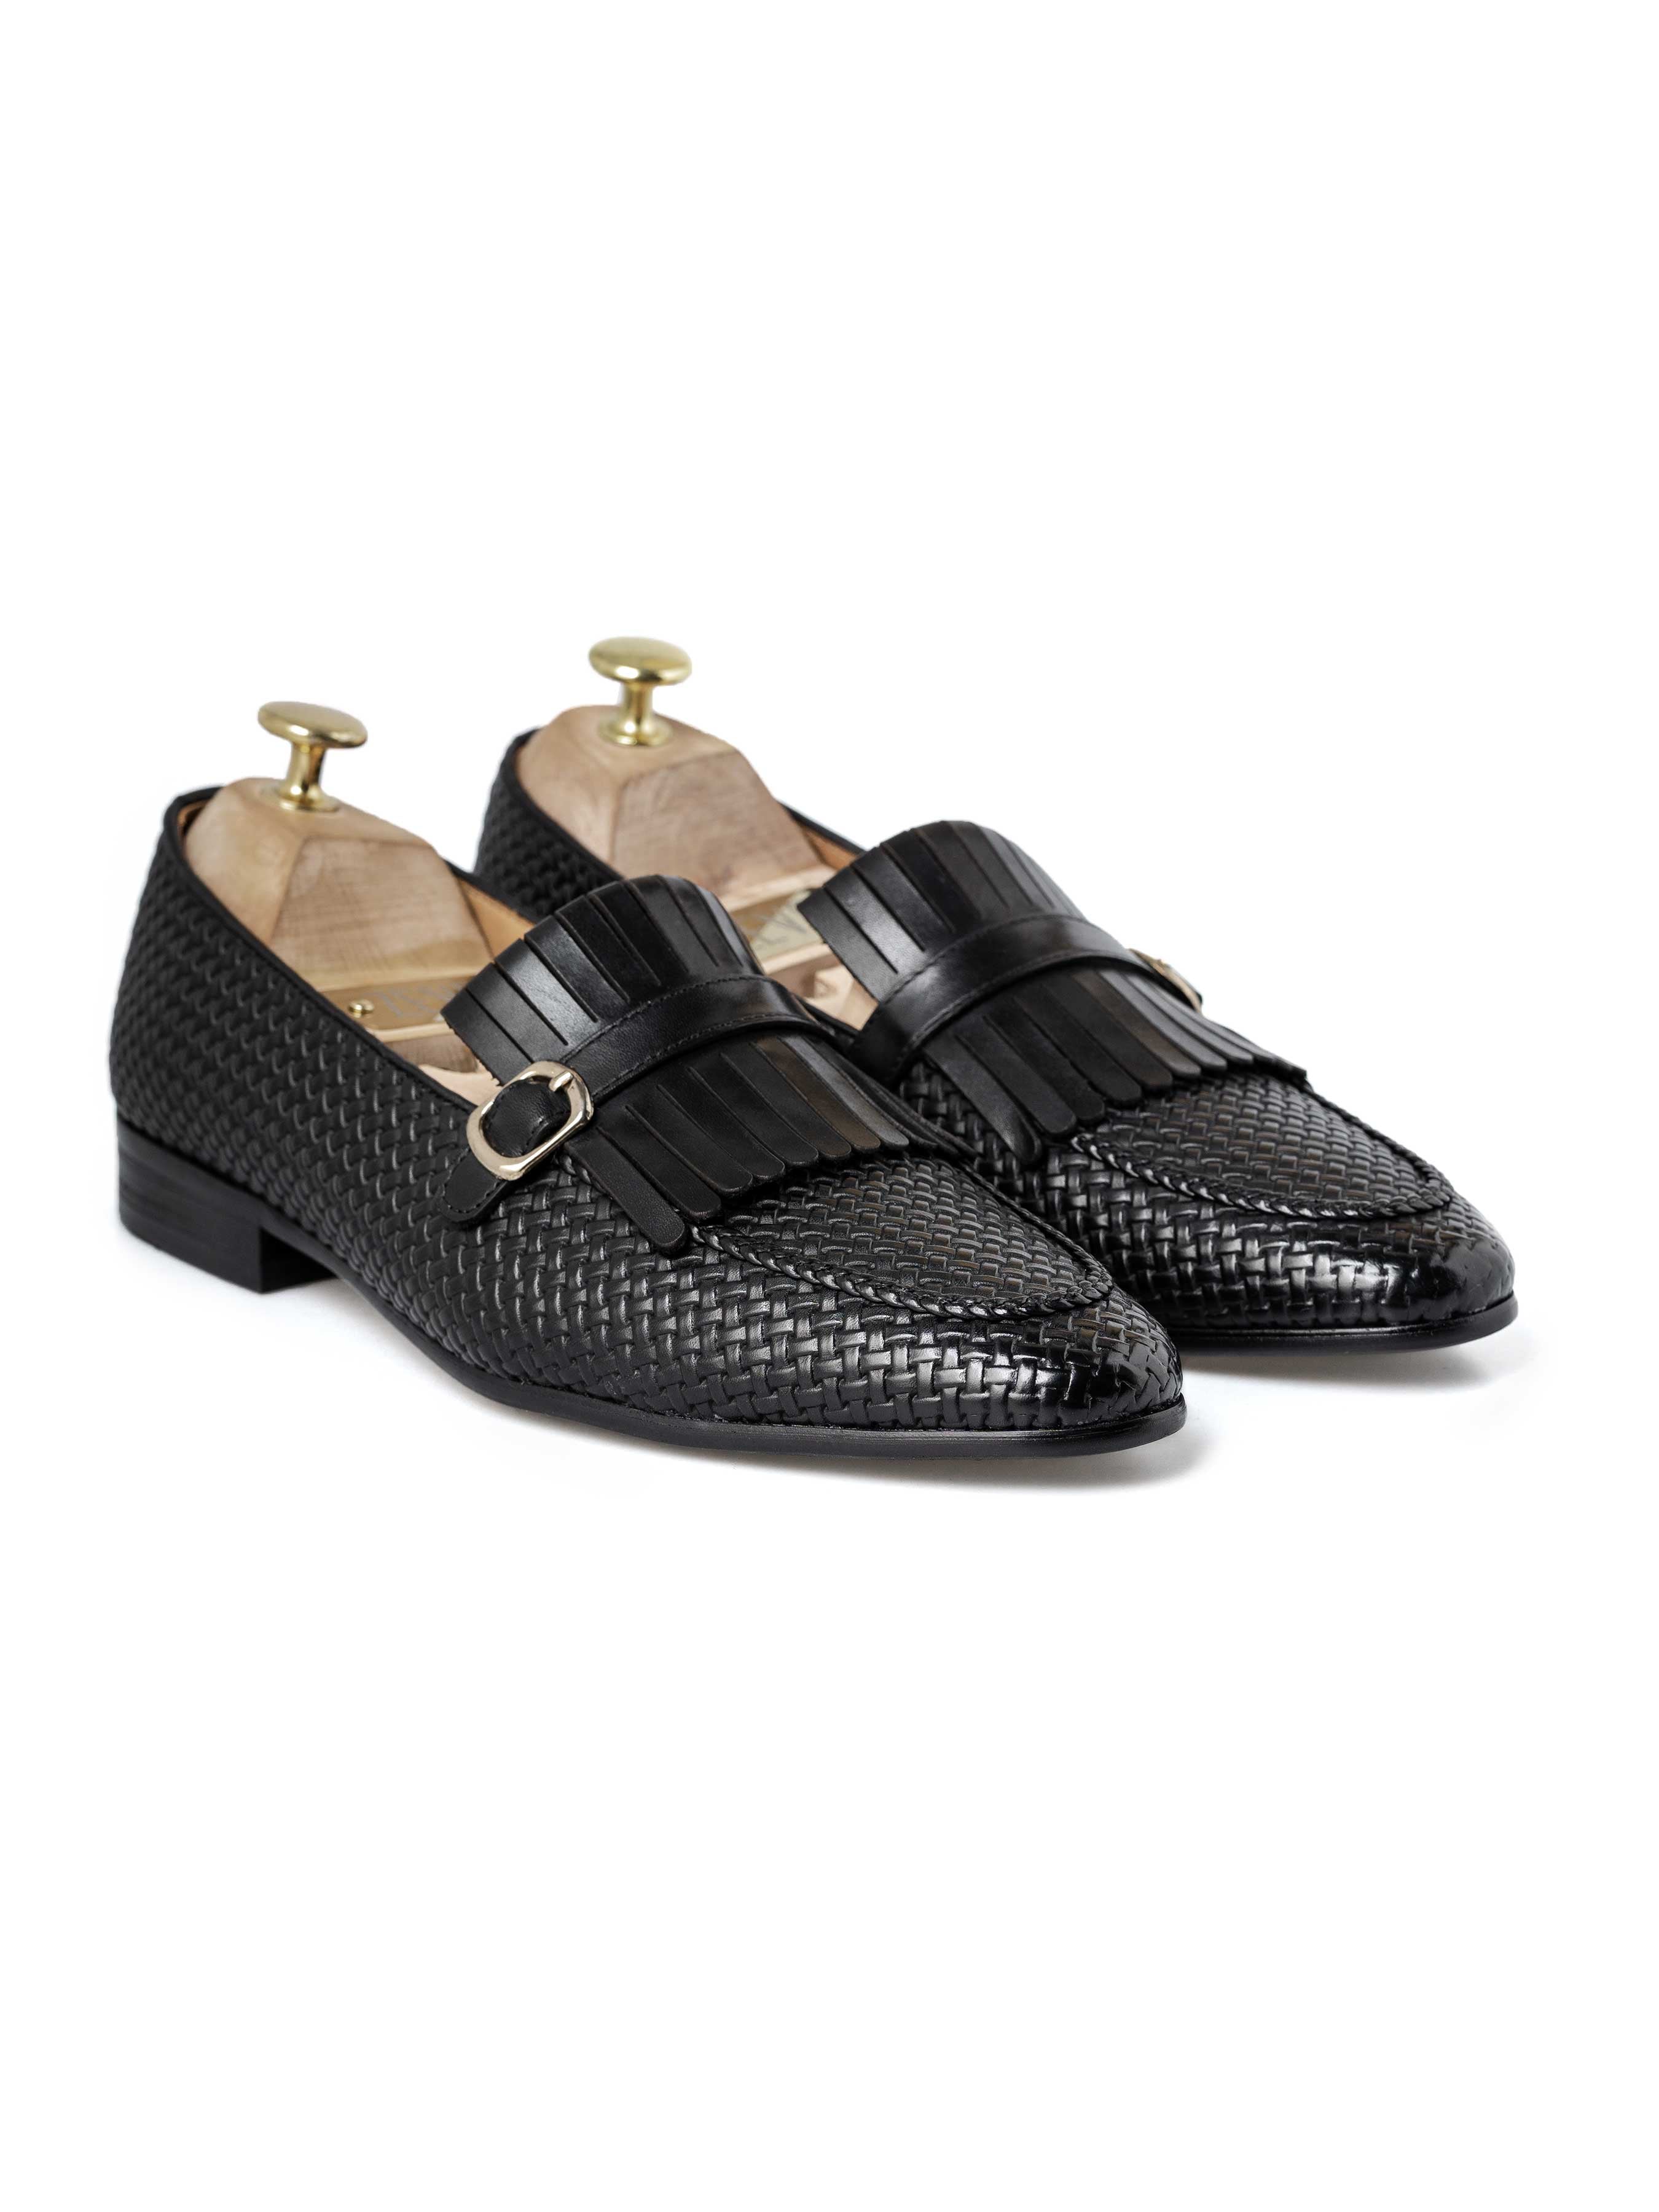 Fringe Kiltie Loafer - Black Woven Leather with Side Buckle (Hand Painted Patina) - Zeve Shoes